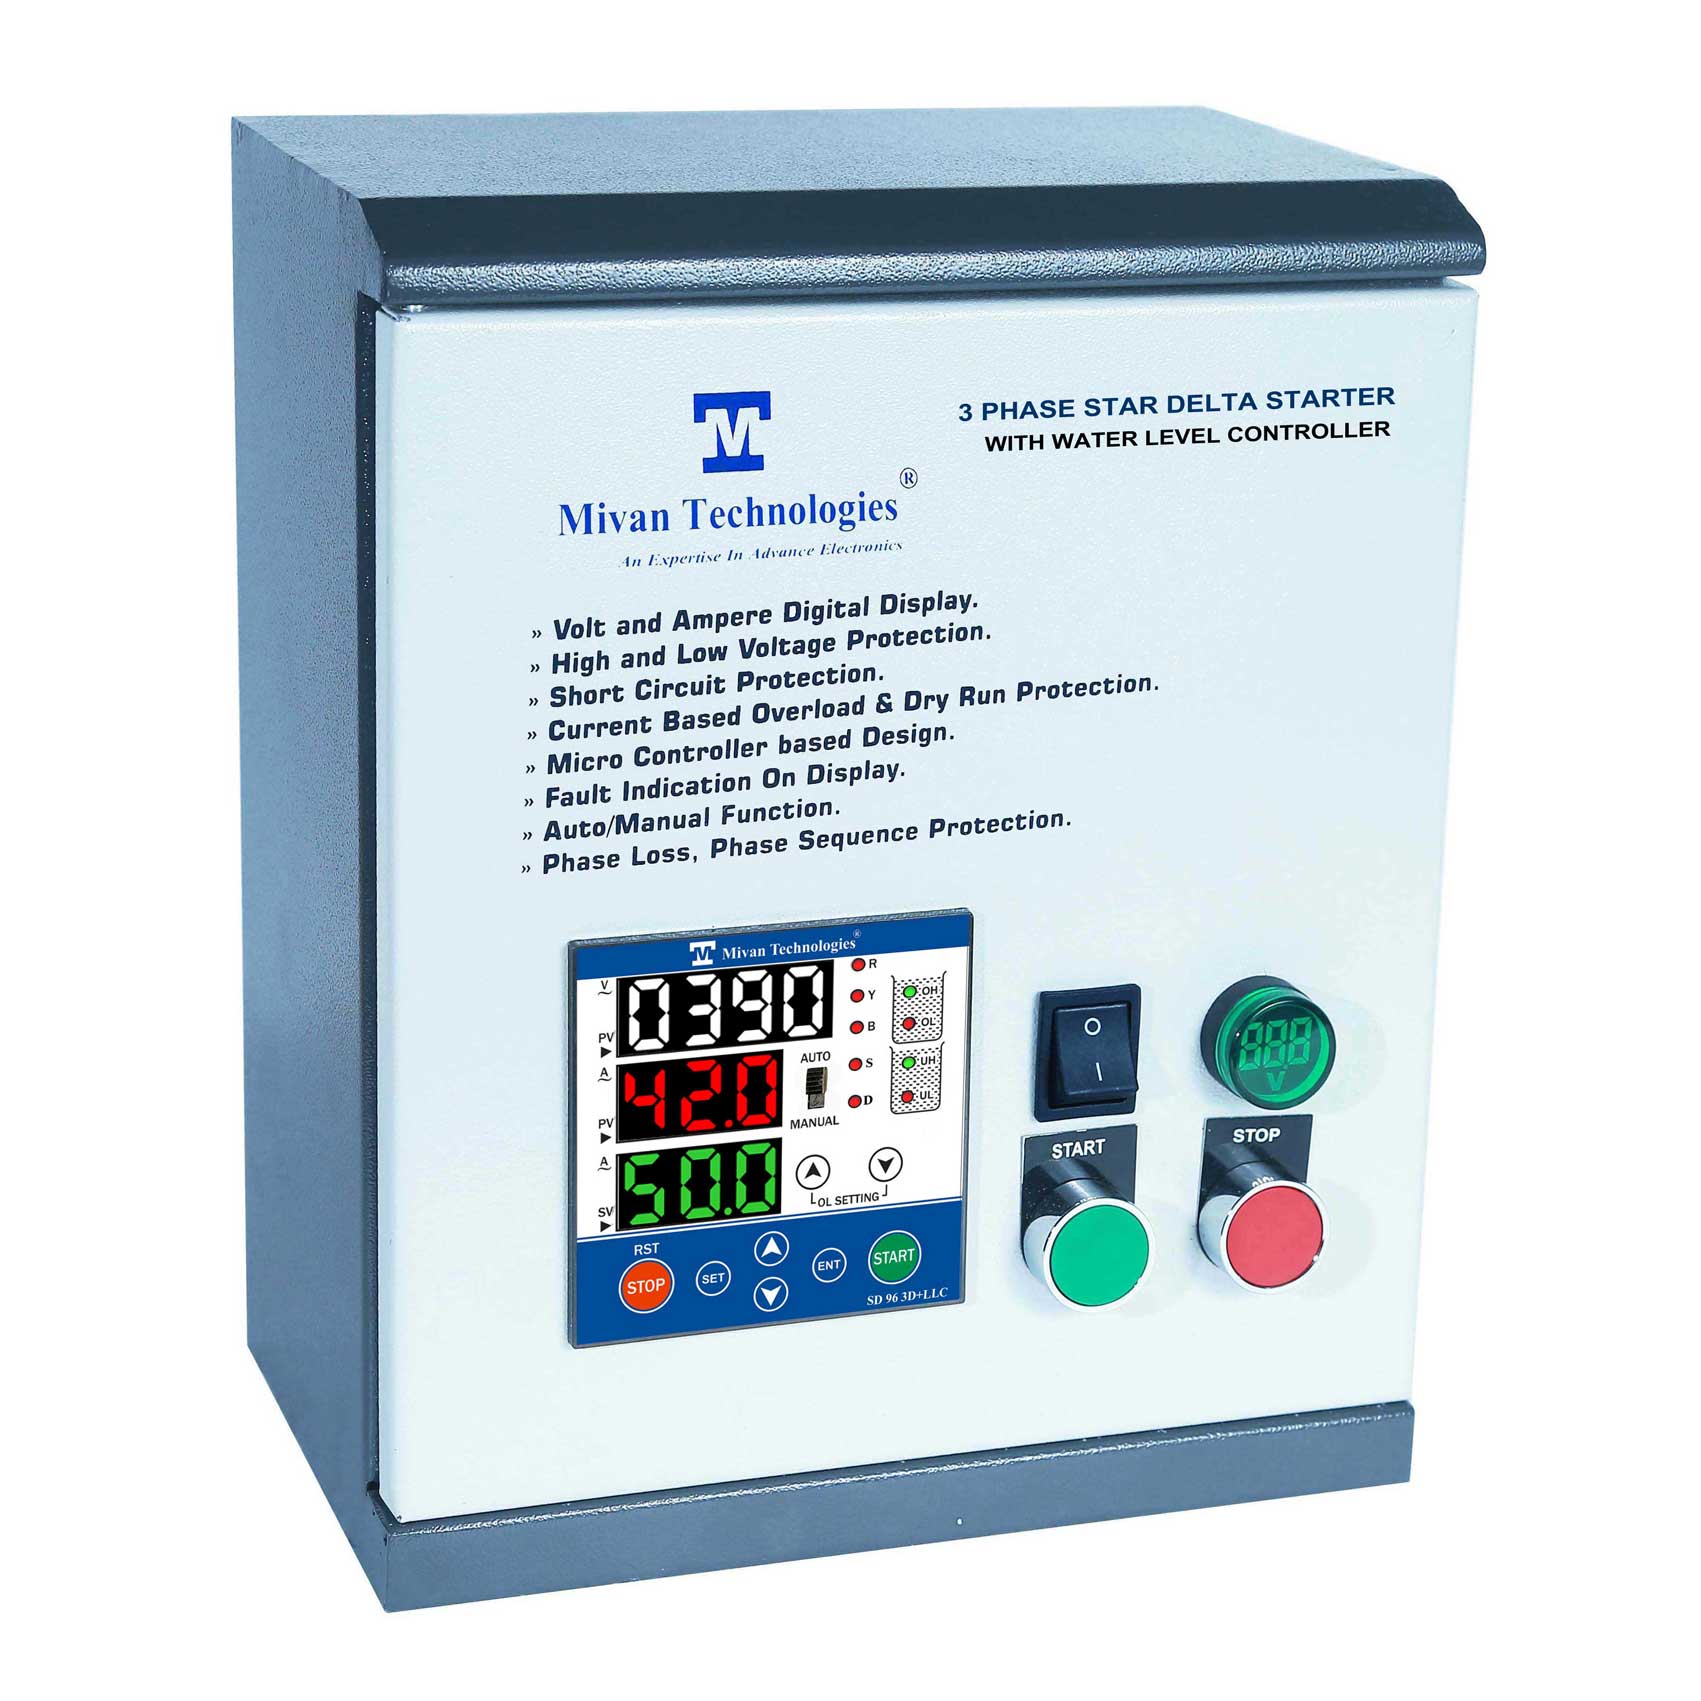 3 phase 3 display Heavy Duty water level controller with Star Delta motor starter with HV LV OL Dry protection with Auto switch spp and timer SD808065 for 40 HP motor